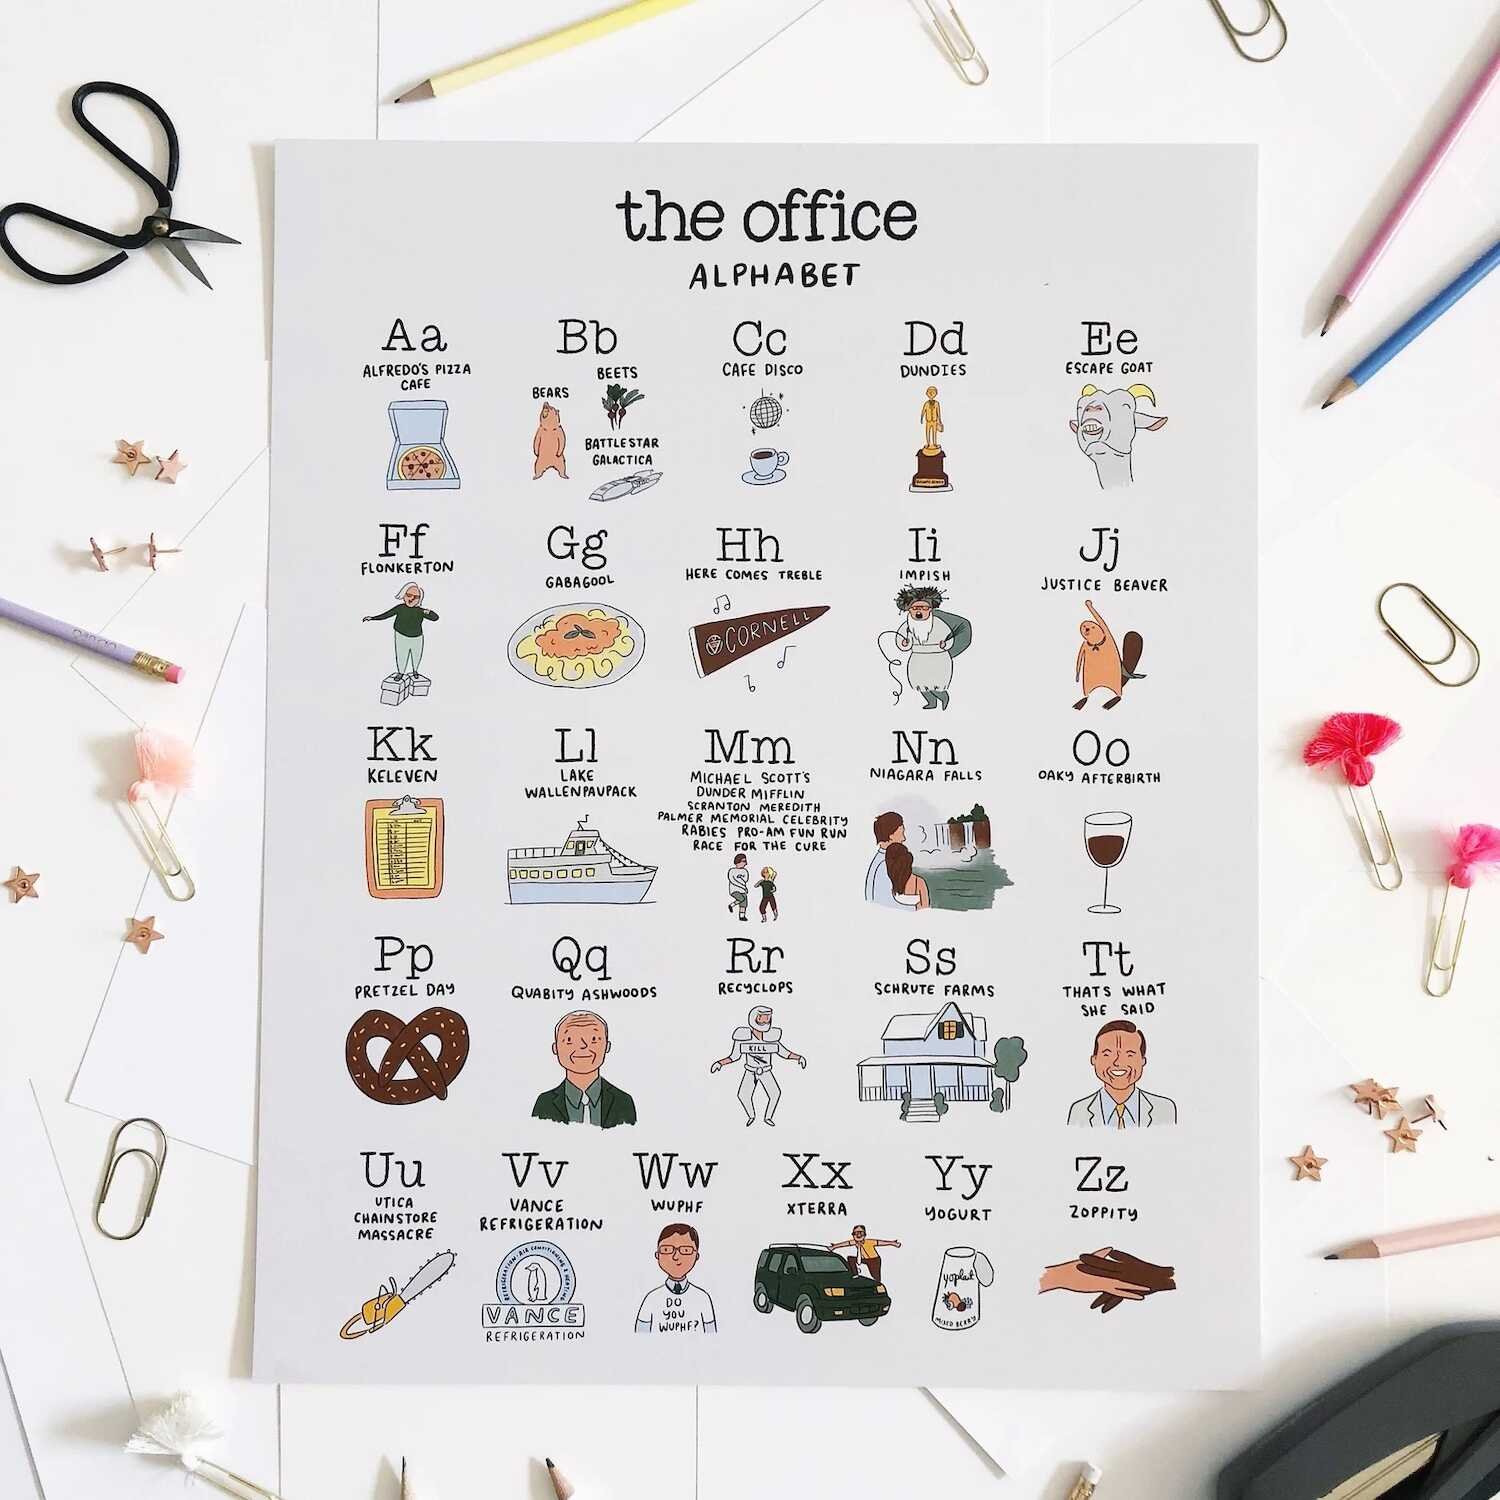 The Office TV Show Alphabet Poster